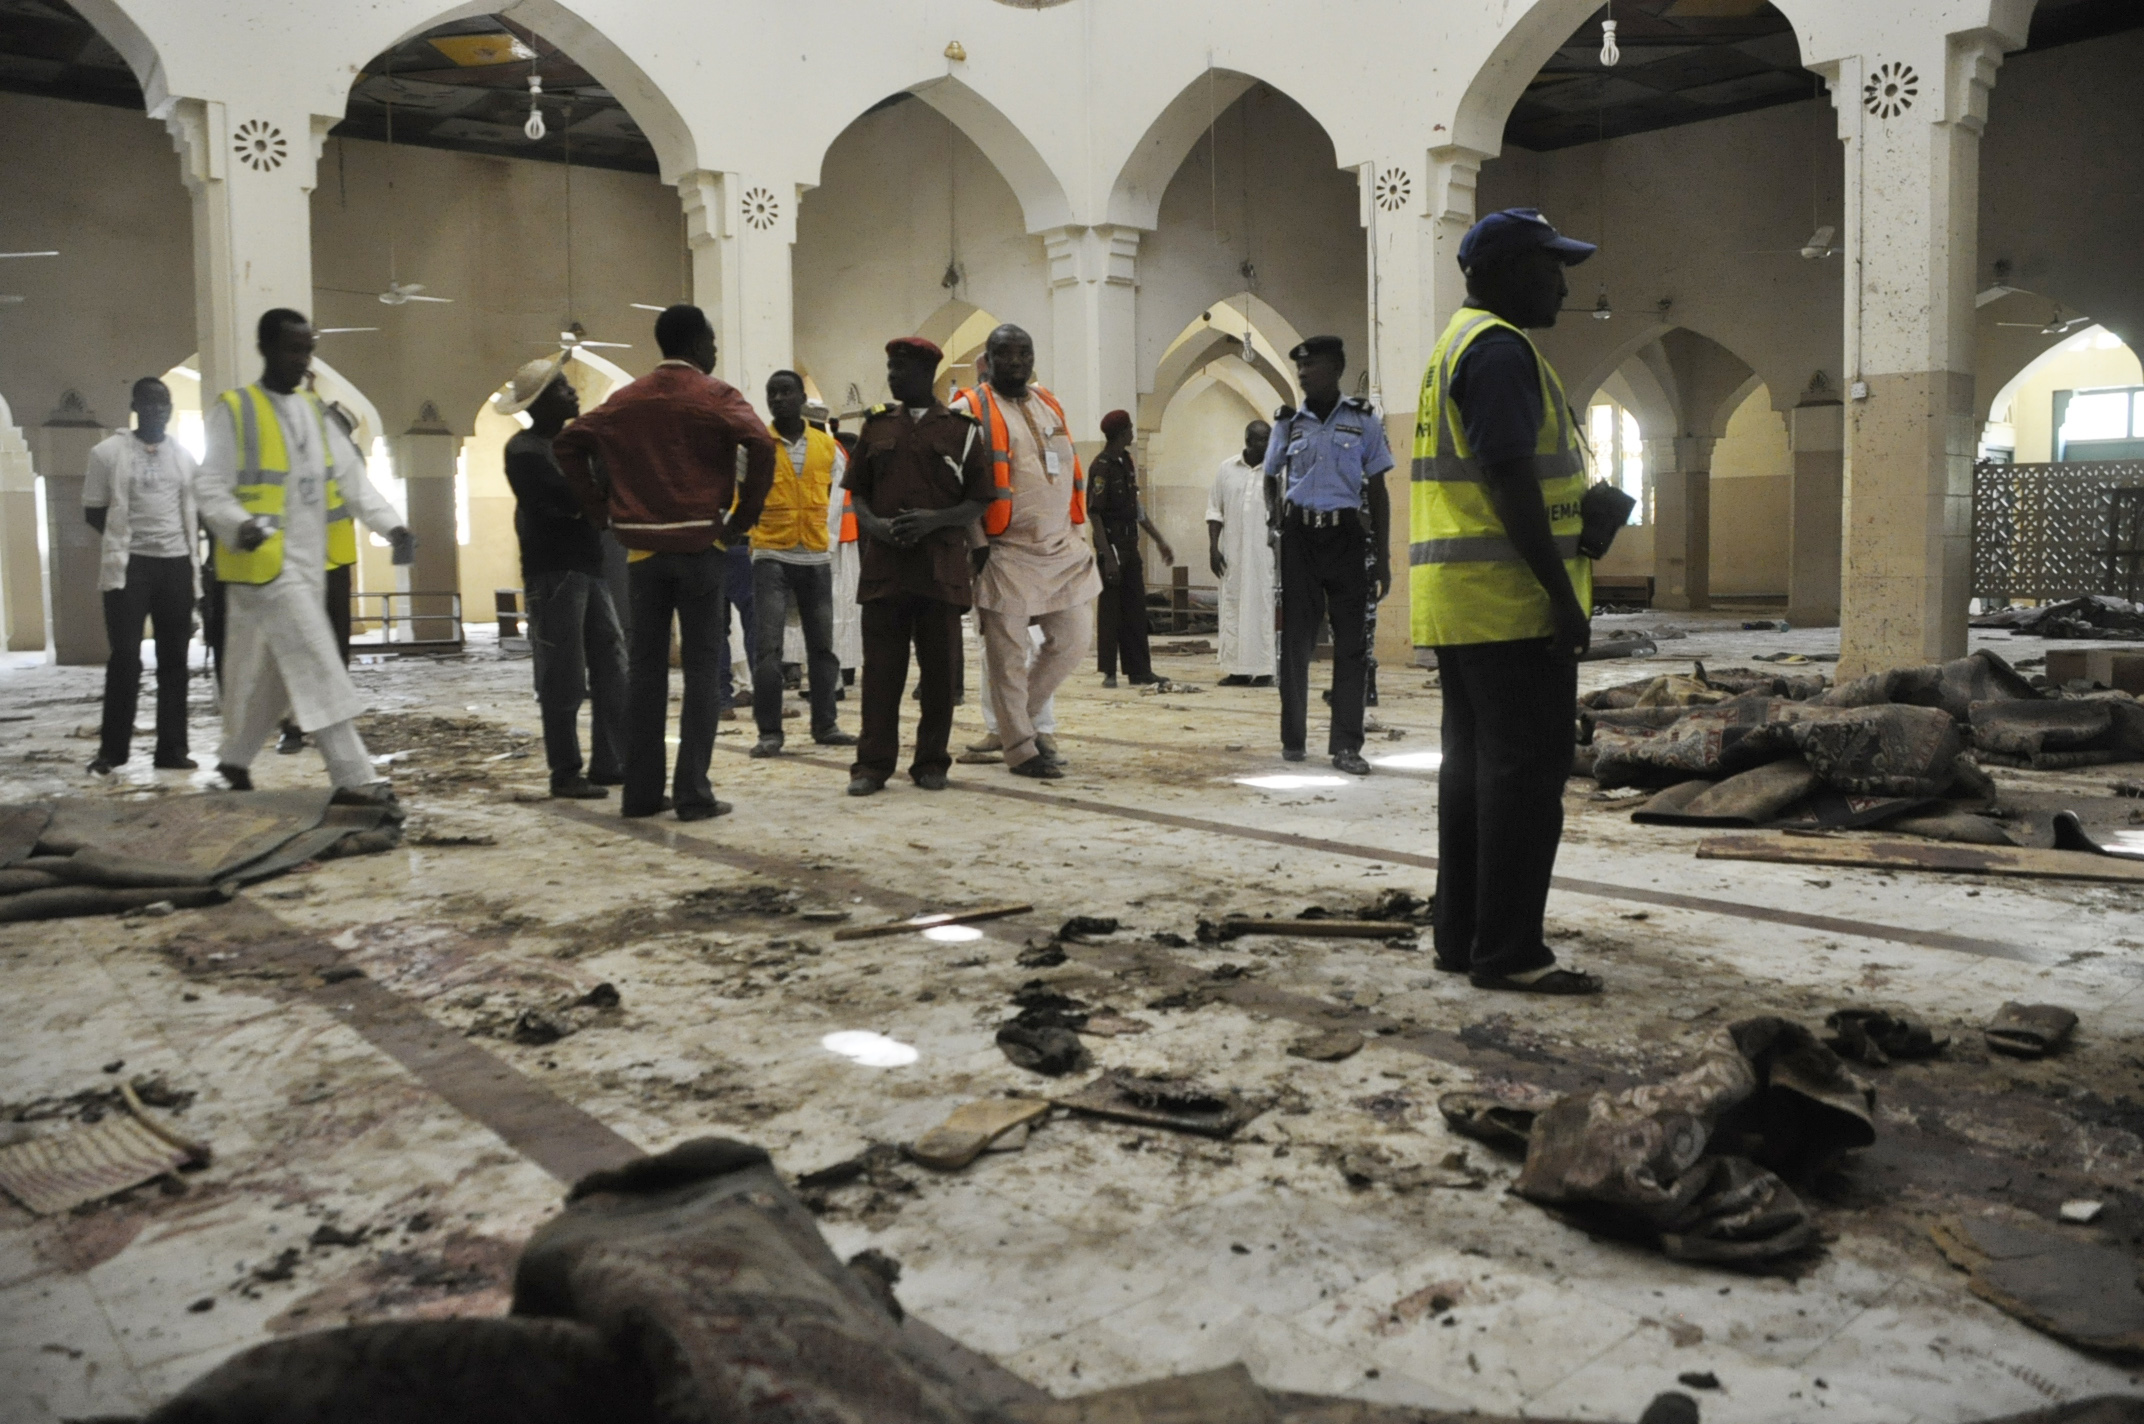 PHOTO: People inspect the central mosque following a bomb explosion in Kano, Nigeria, Nov. 29, 2014. No group claimed responsibility for the attack but as it bears the hallmarks of past attacks by Boko Haram, many assume that group to be responsible.